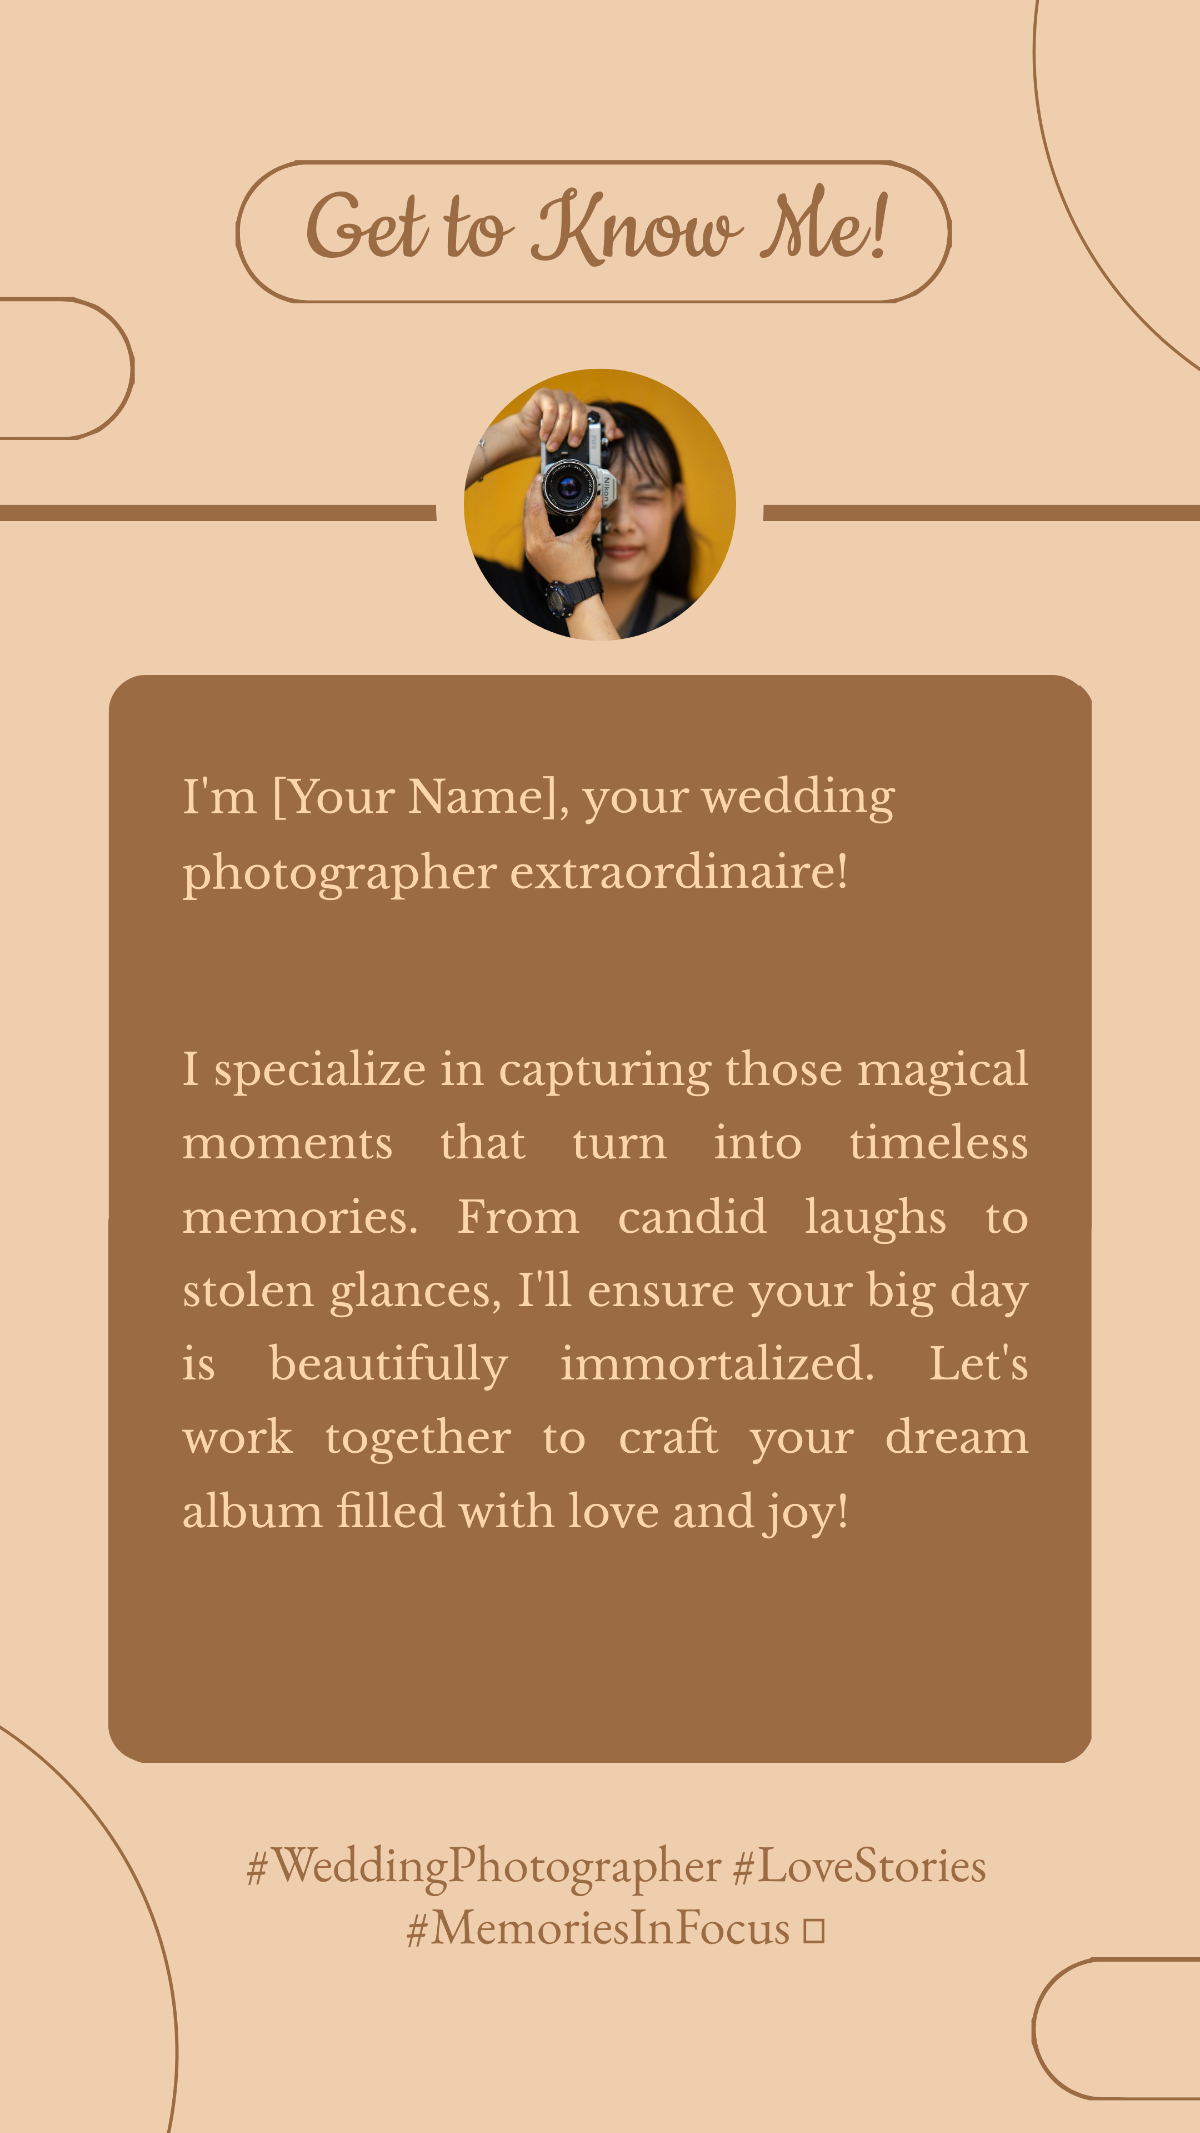 Wedding Photographer Get to Know Me Instagram Post